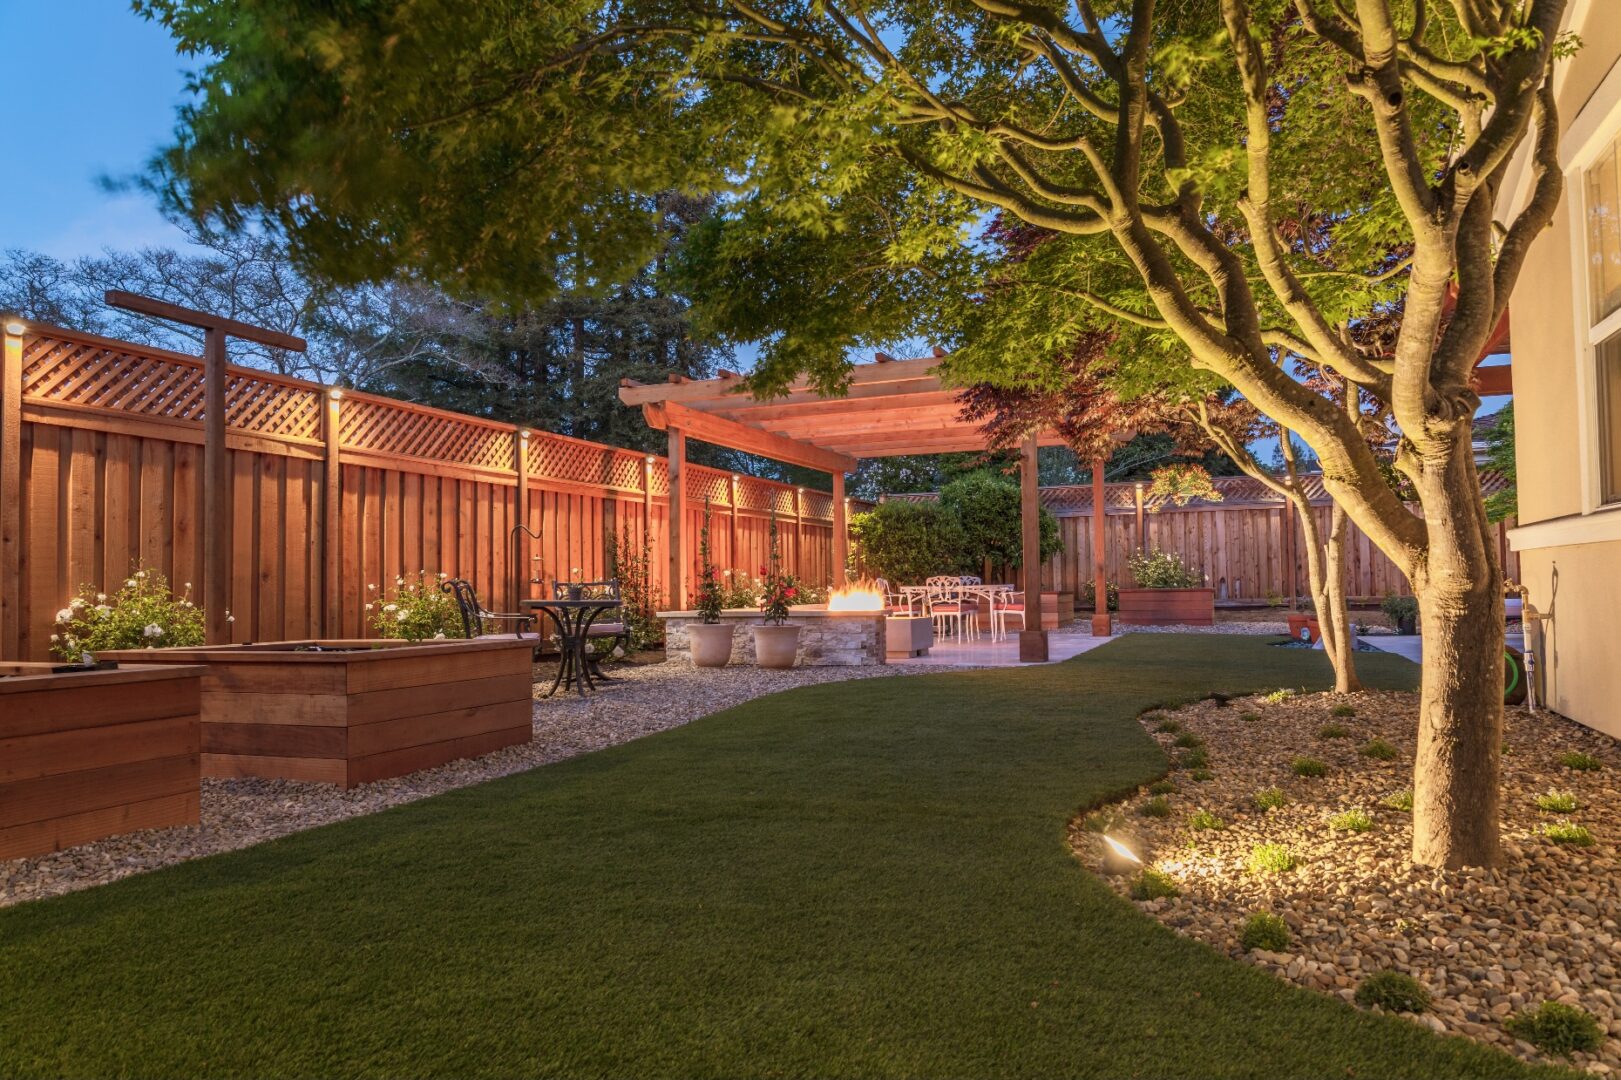 Artificial grass, pebbles, trees, gazebo, landscaping by Guys Yard Design in Sonoma, CA